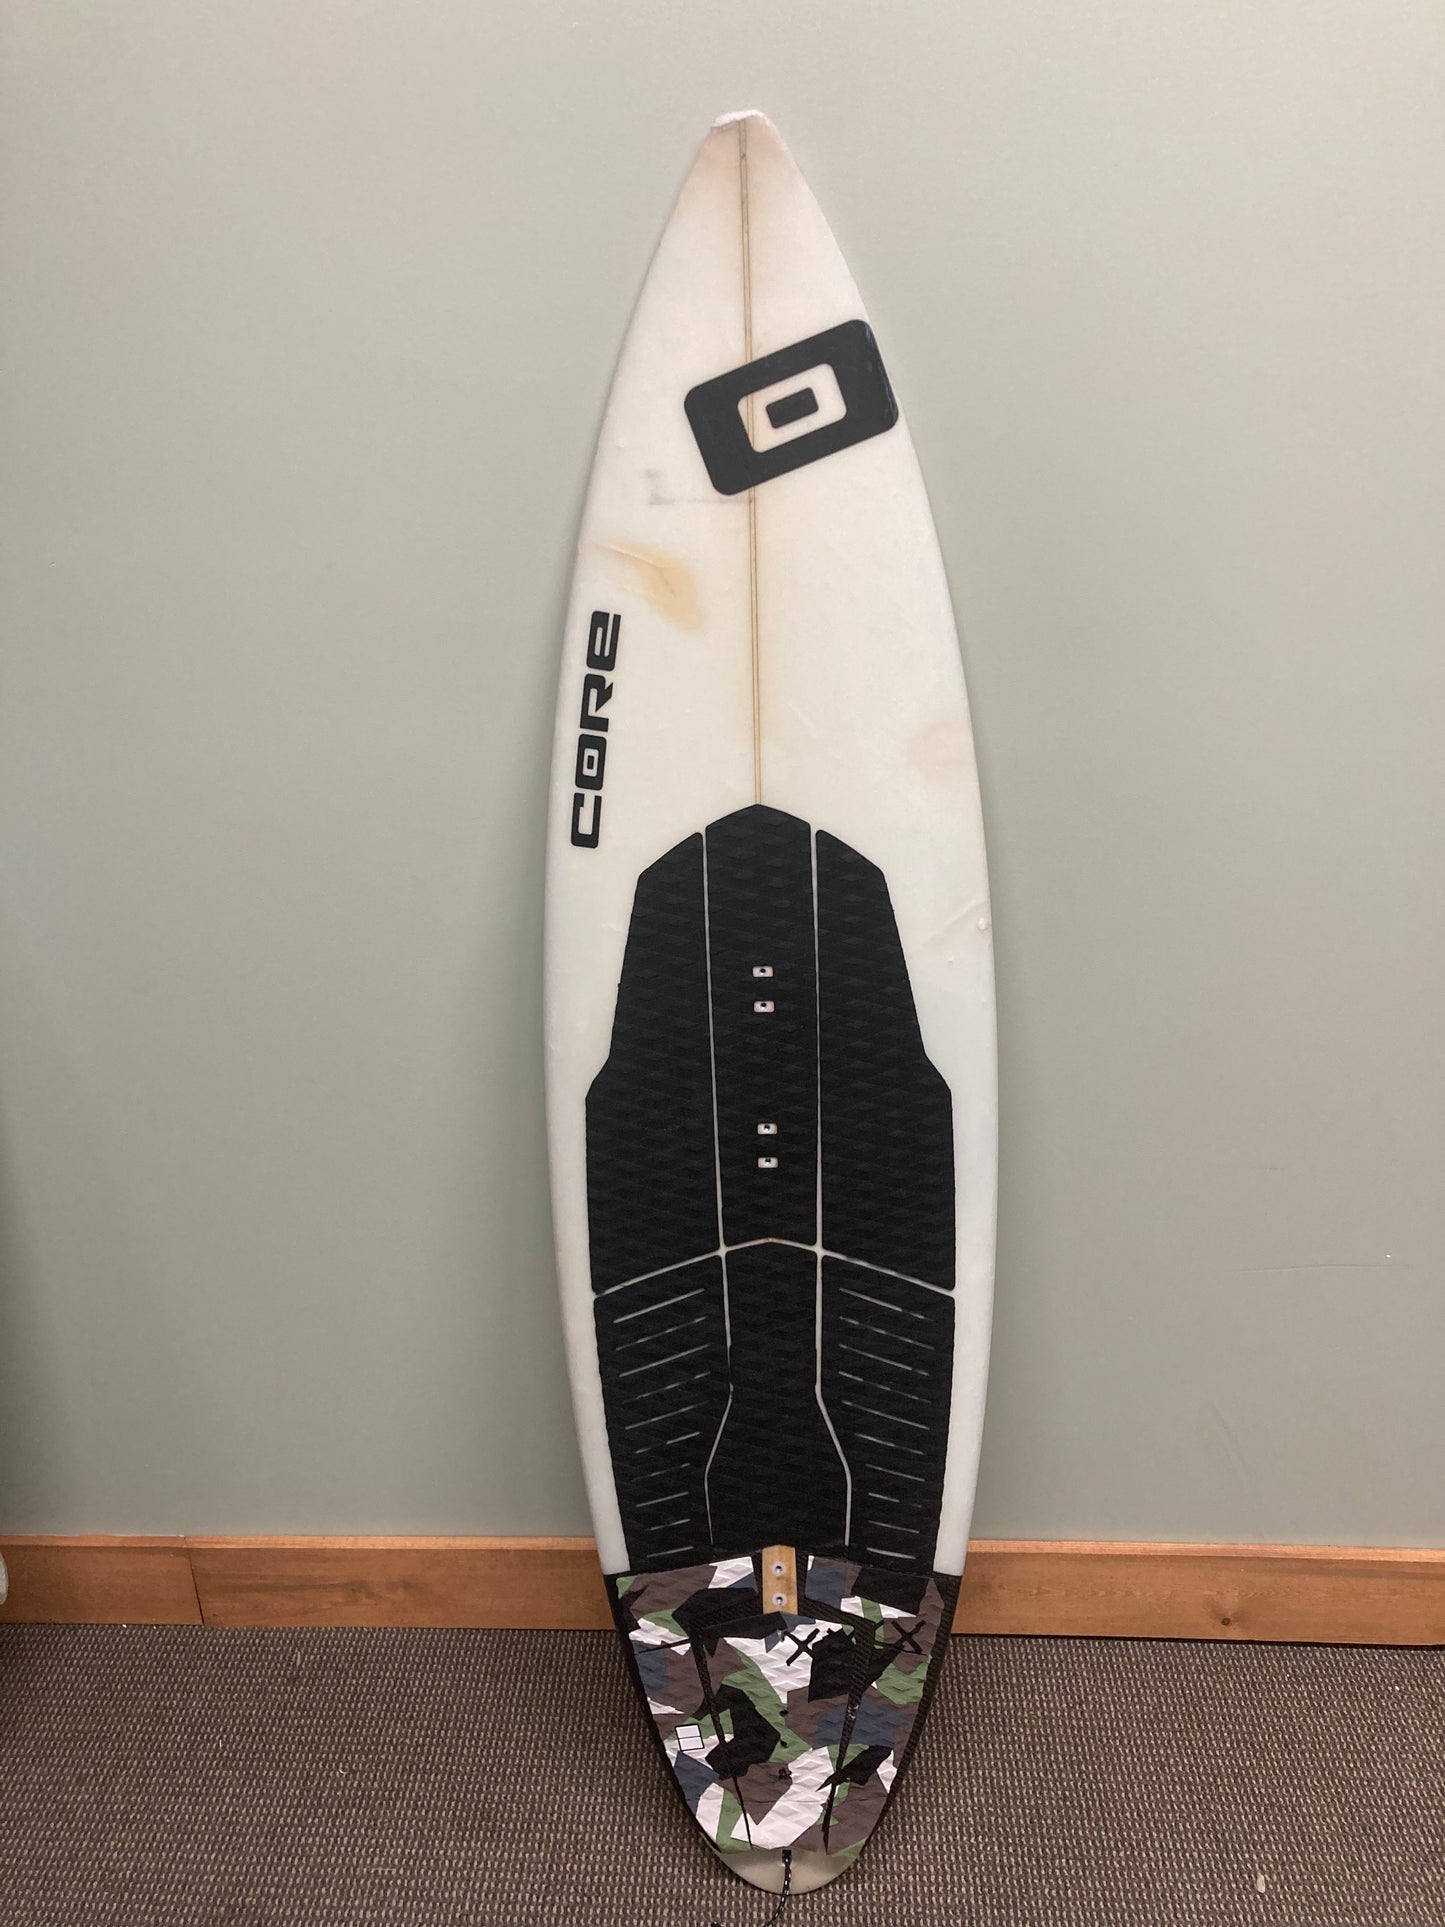 USED 5' 10" CORE RIPPER 3 COMPLETE WITH TRACTION PADS AND FINS